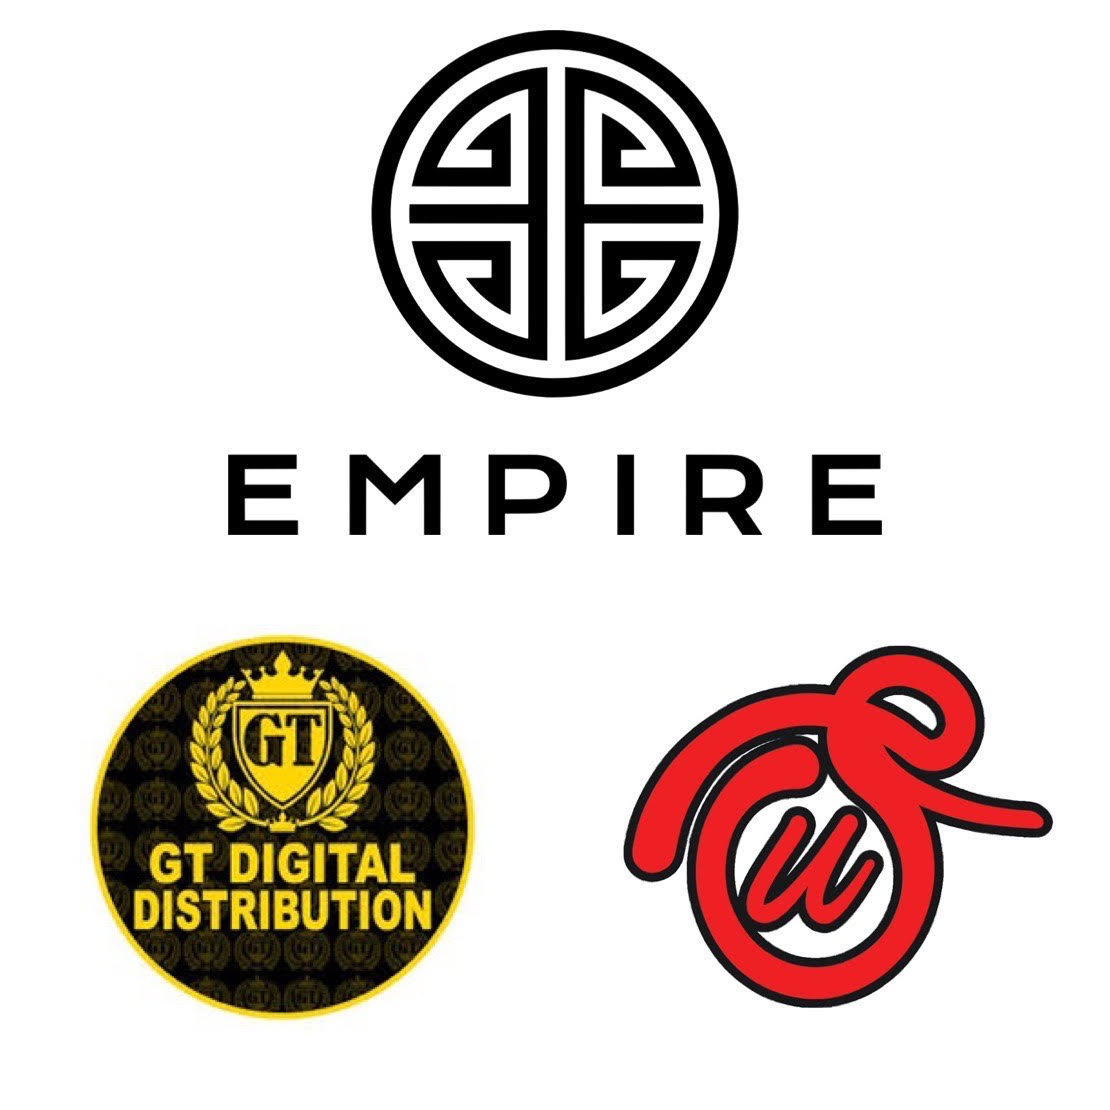 Stackin Up Entertainment LLC Is pleased to announce that they landed a major sub label deal with GT Digital/Emp